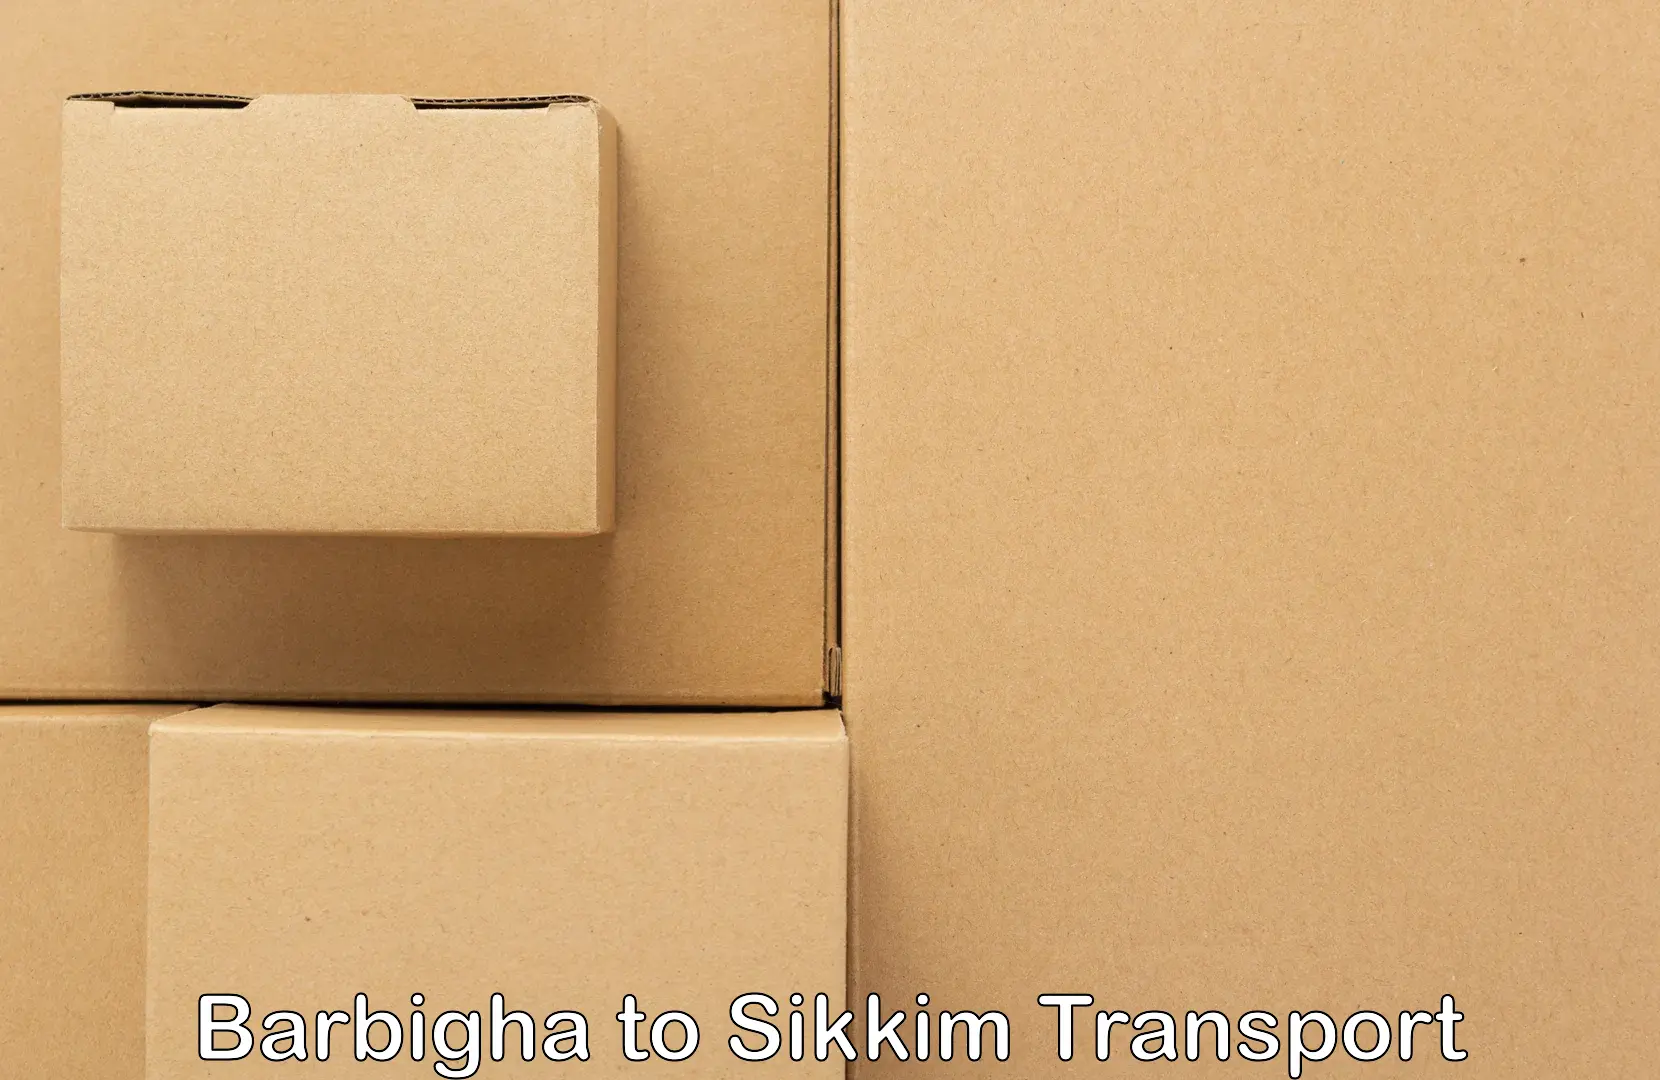 Truck transport companies in India Barbigha to Pelling